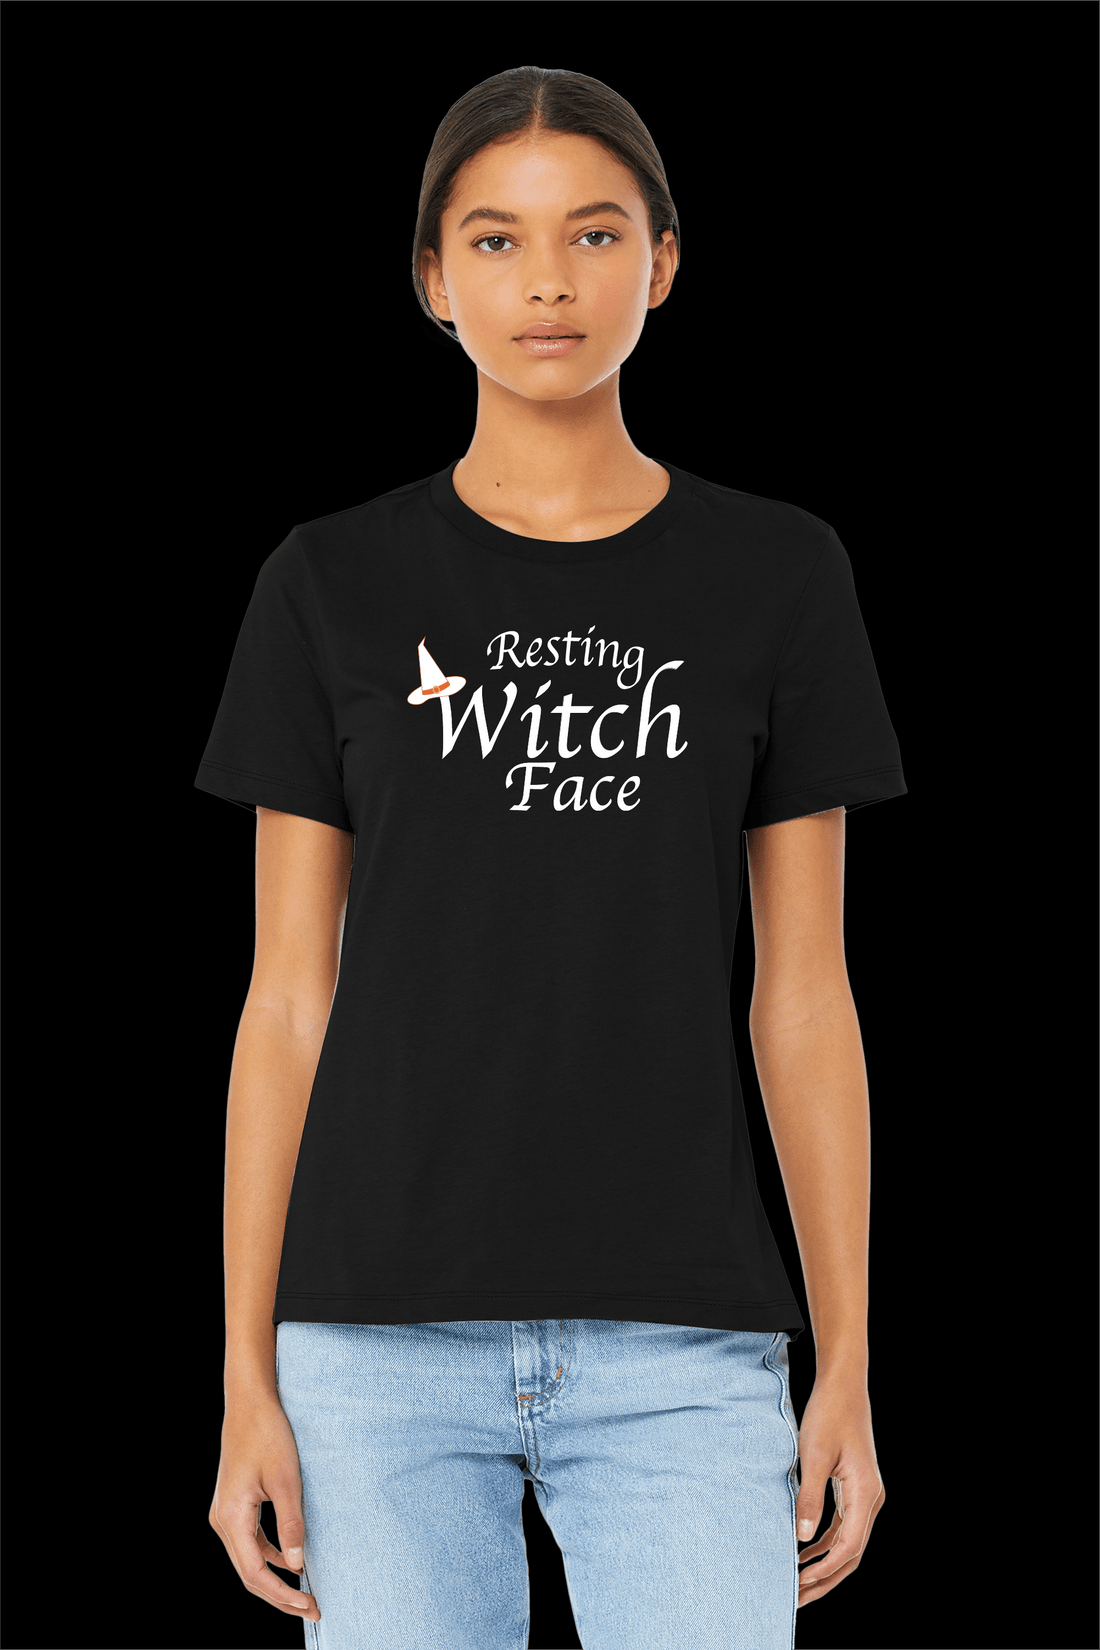 Embrace Your Inner Witch with our "Resting Witch Face" T-Shirt! ✨🎃